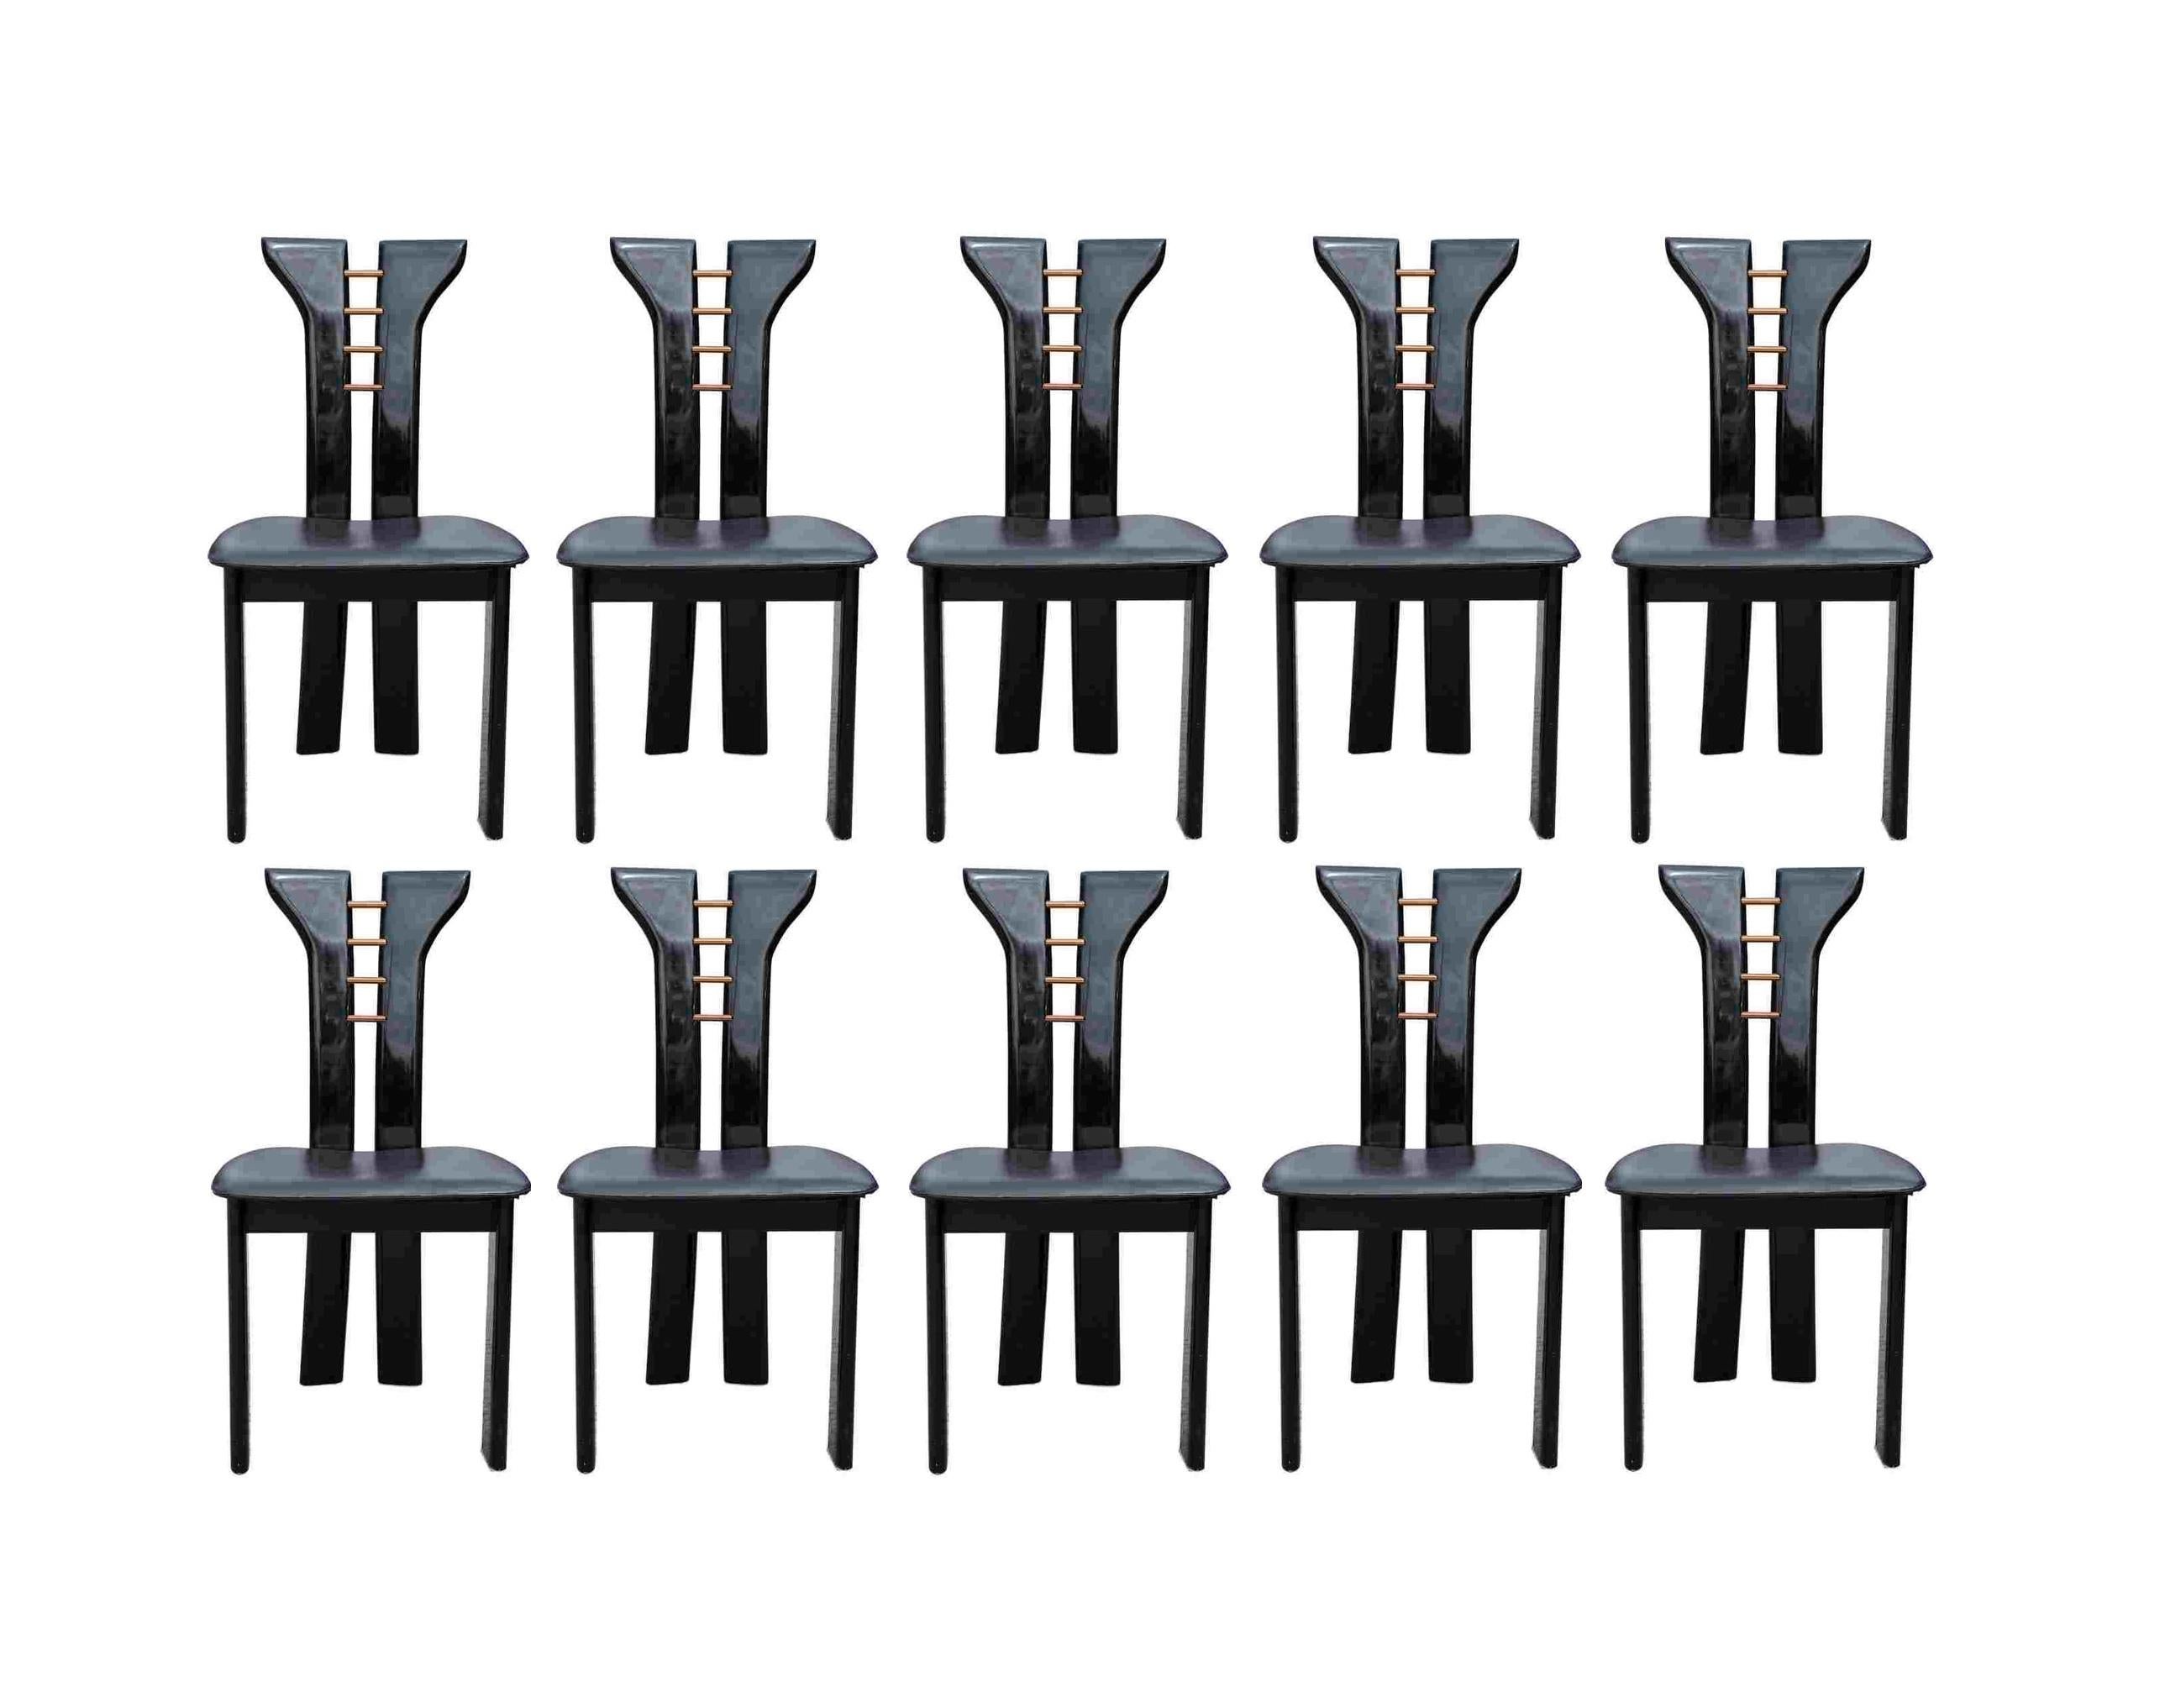 Stunning set of 10 Italian high gloss black lacquer dining chairs by Roche Bobois. Designed by Pierre Cardin. Nice condition no major flaws to note.